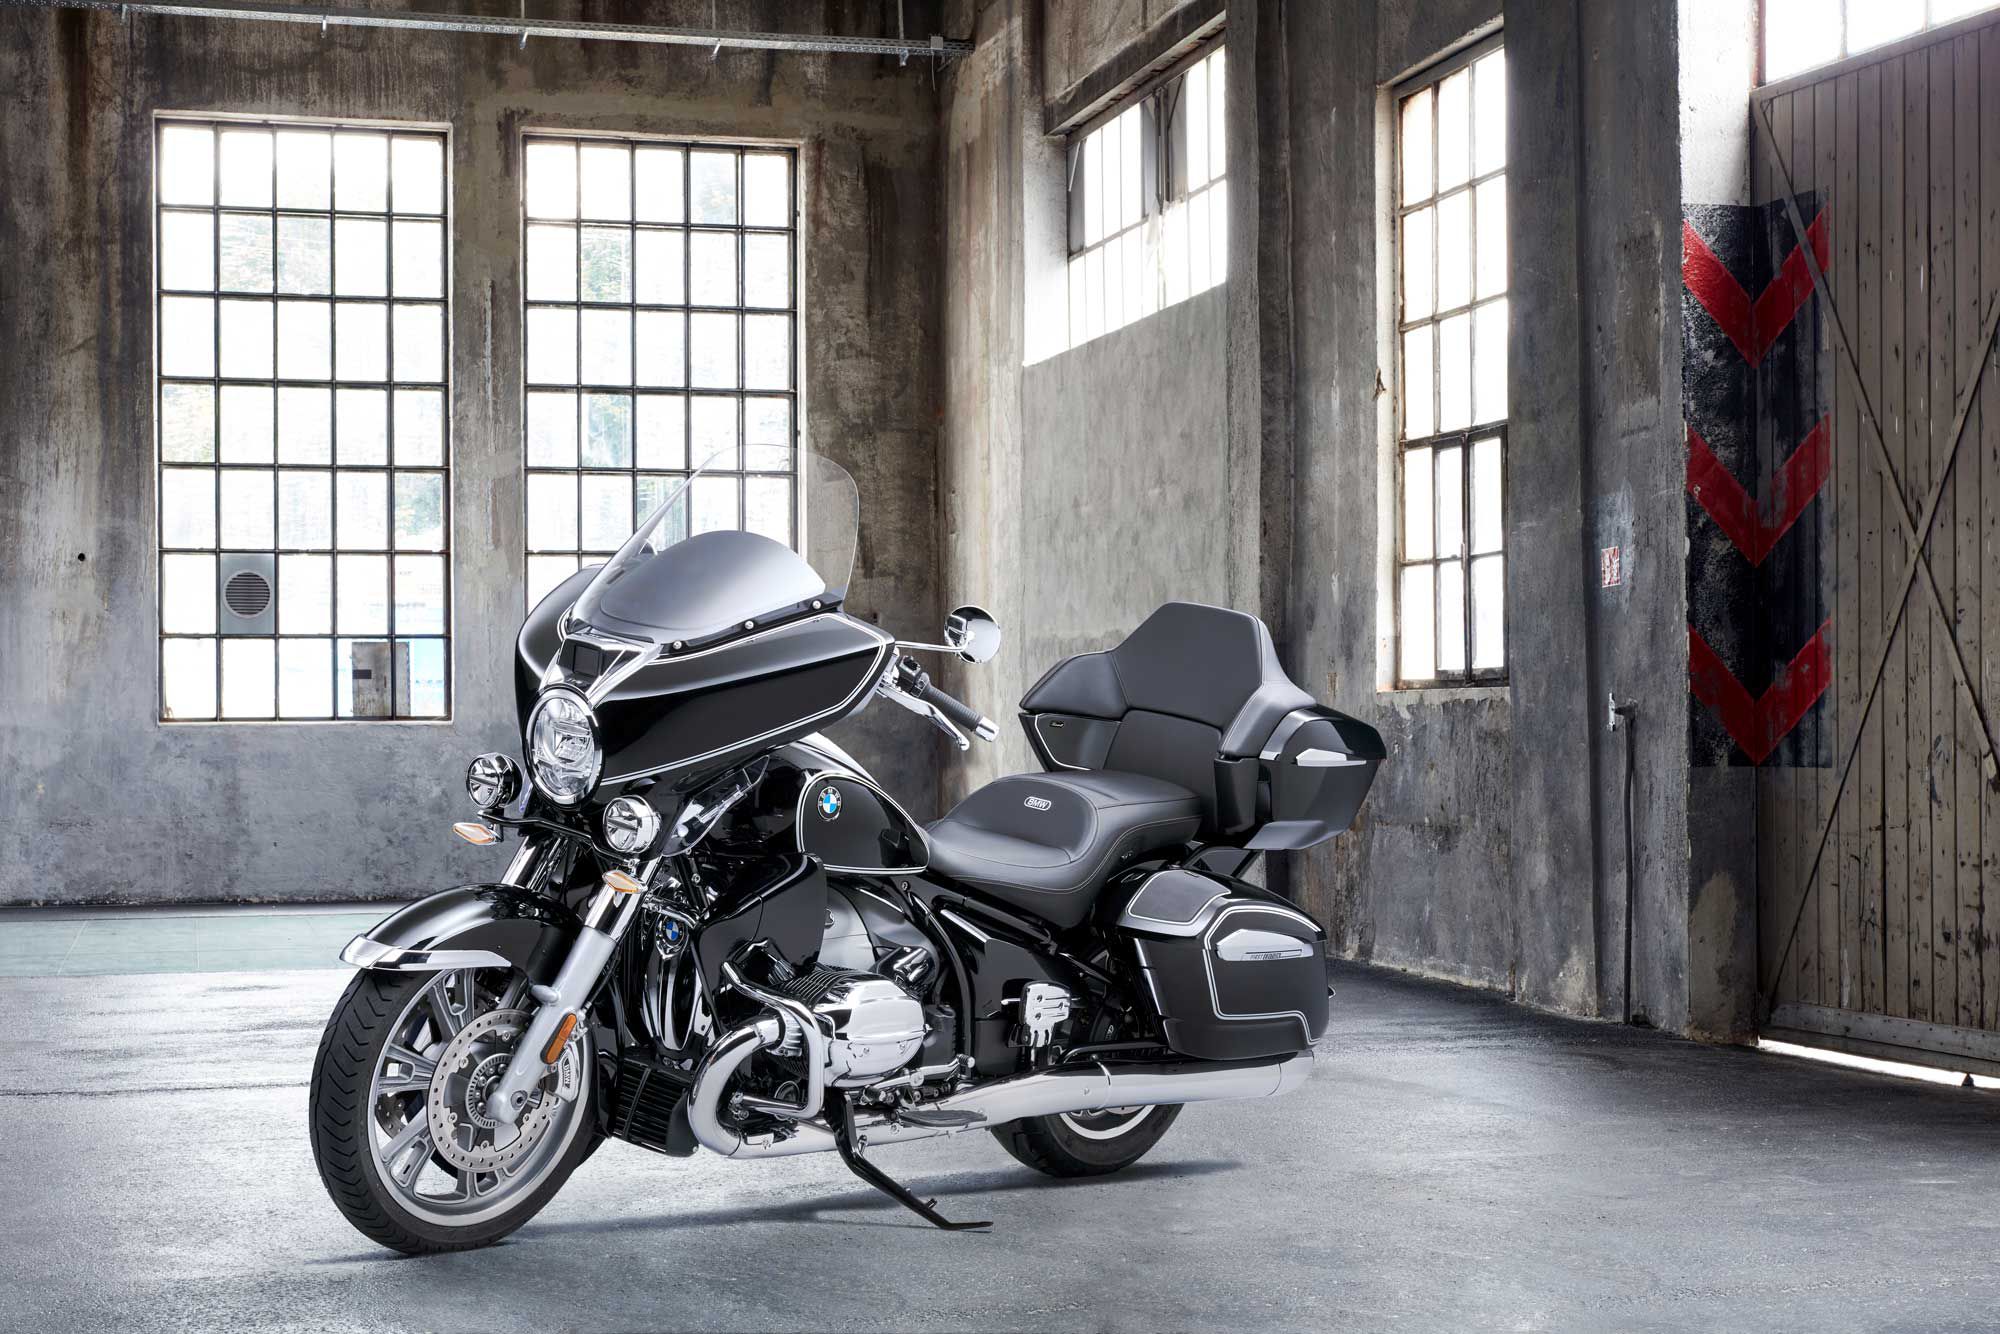 The Transcontinental will start at $24,995, but there are lots of enticing options to consider.